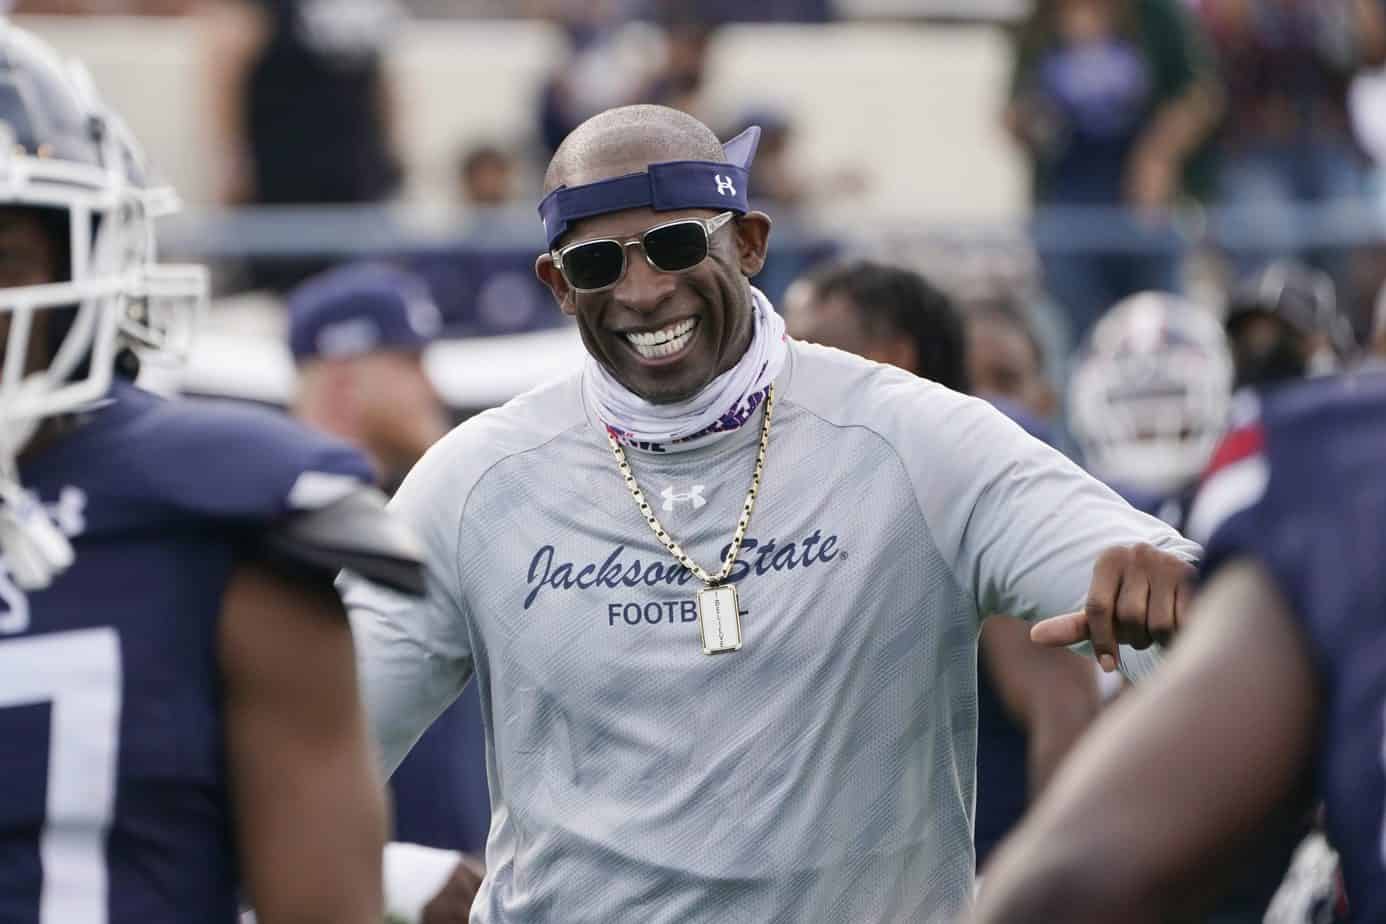 Social media blows up after it was reported that #1 recruit, Travis Hunter, was flipping his commitment from FSU to Deion Sanders' Jackson State